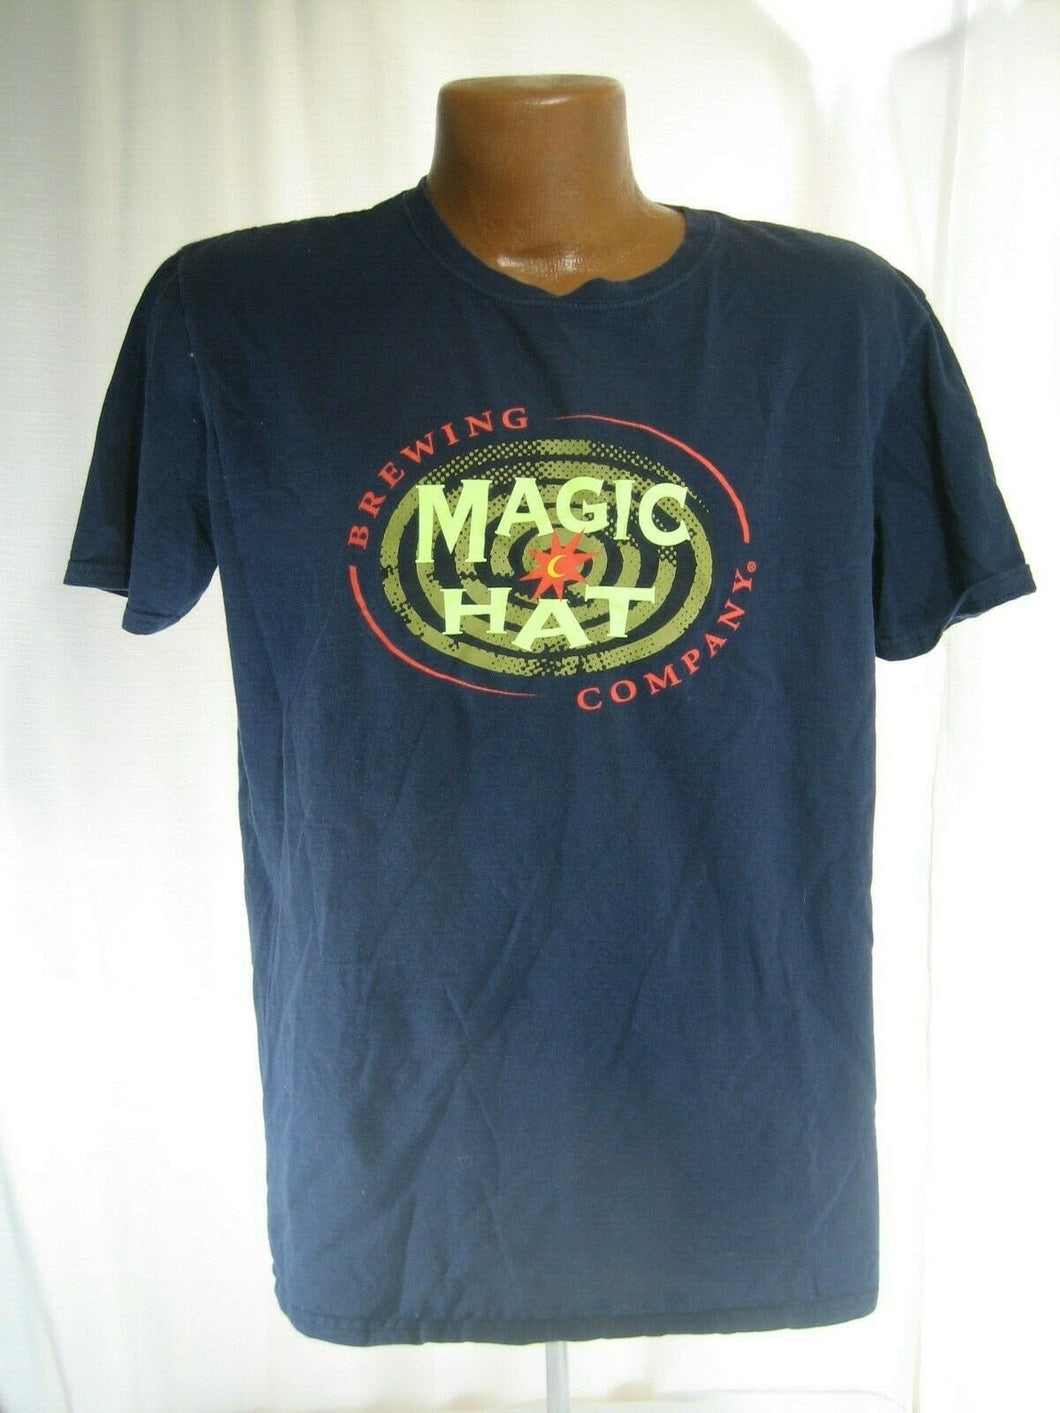 MAGIC HAT BREWING COMPANY BEER BLUE T-SHIRT ADULT SIZE M